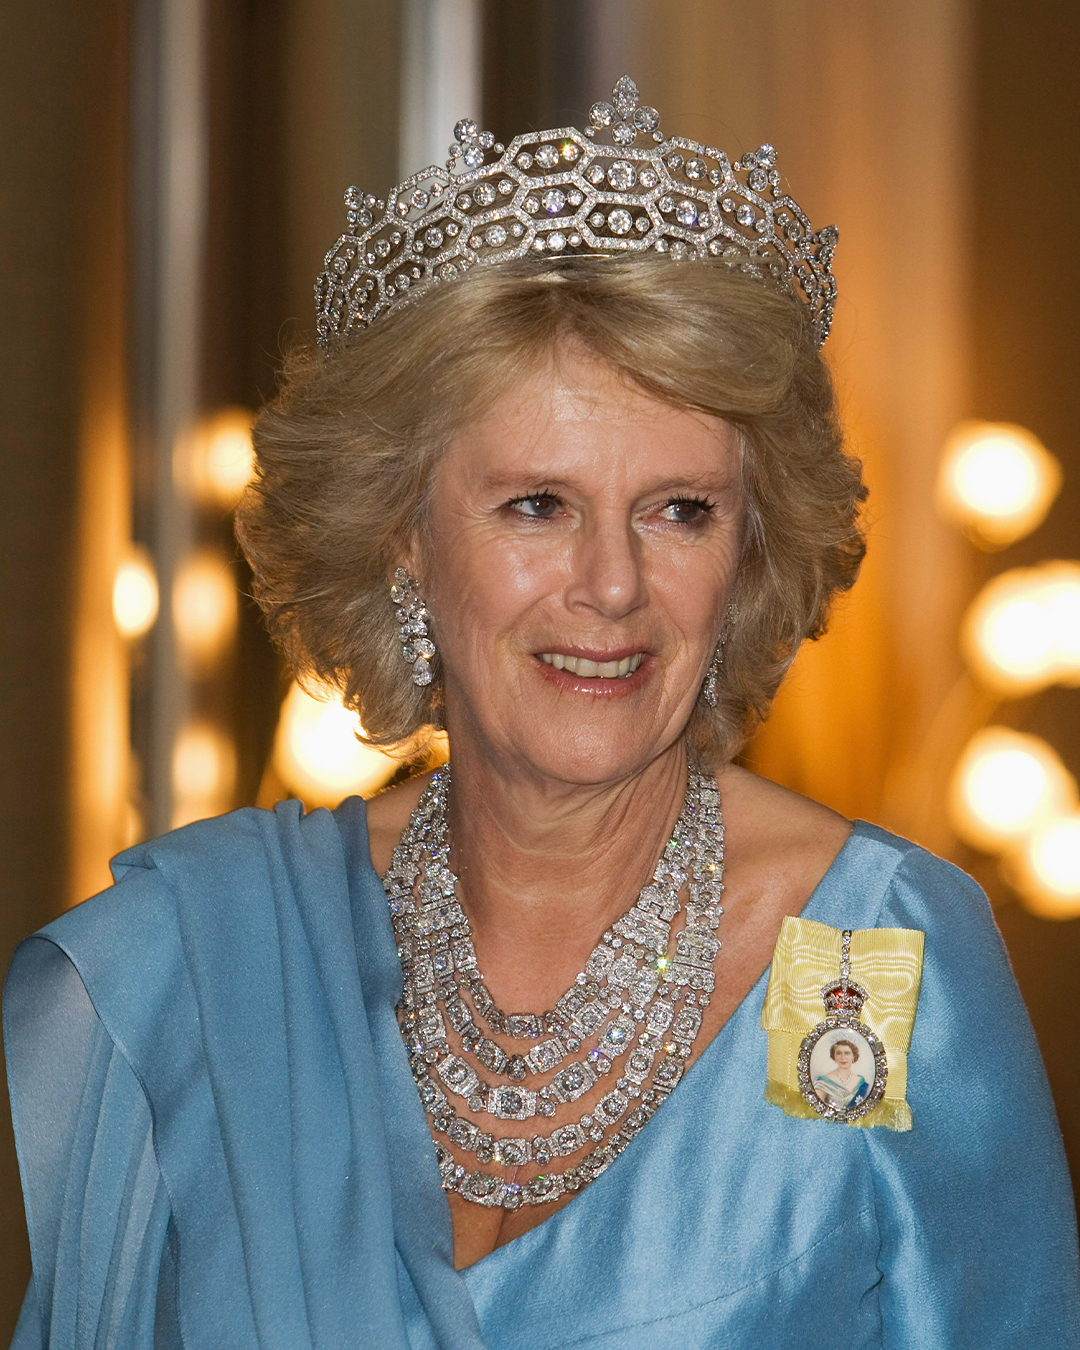 The Glorious Jewels of Camilla The Queen Consort  Only Natural Diamonds